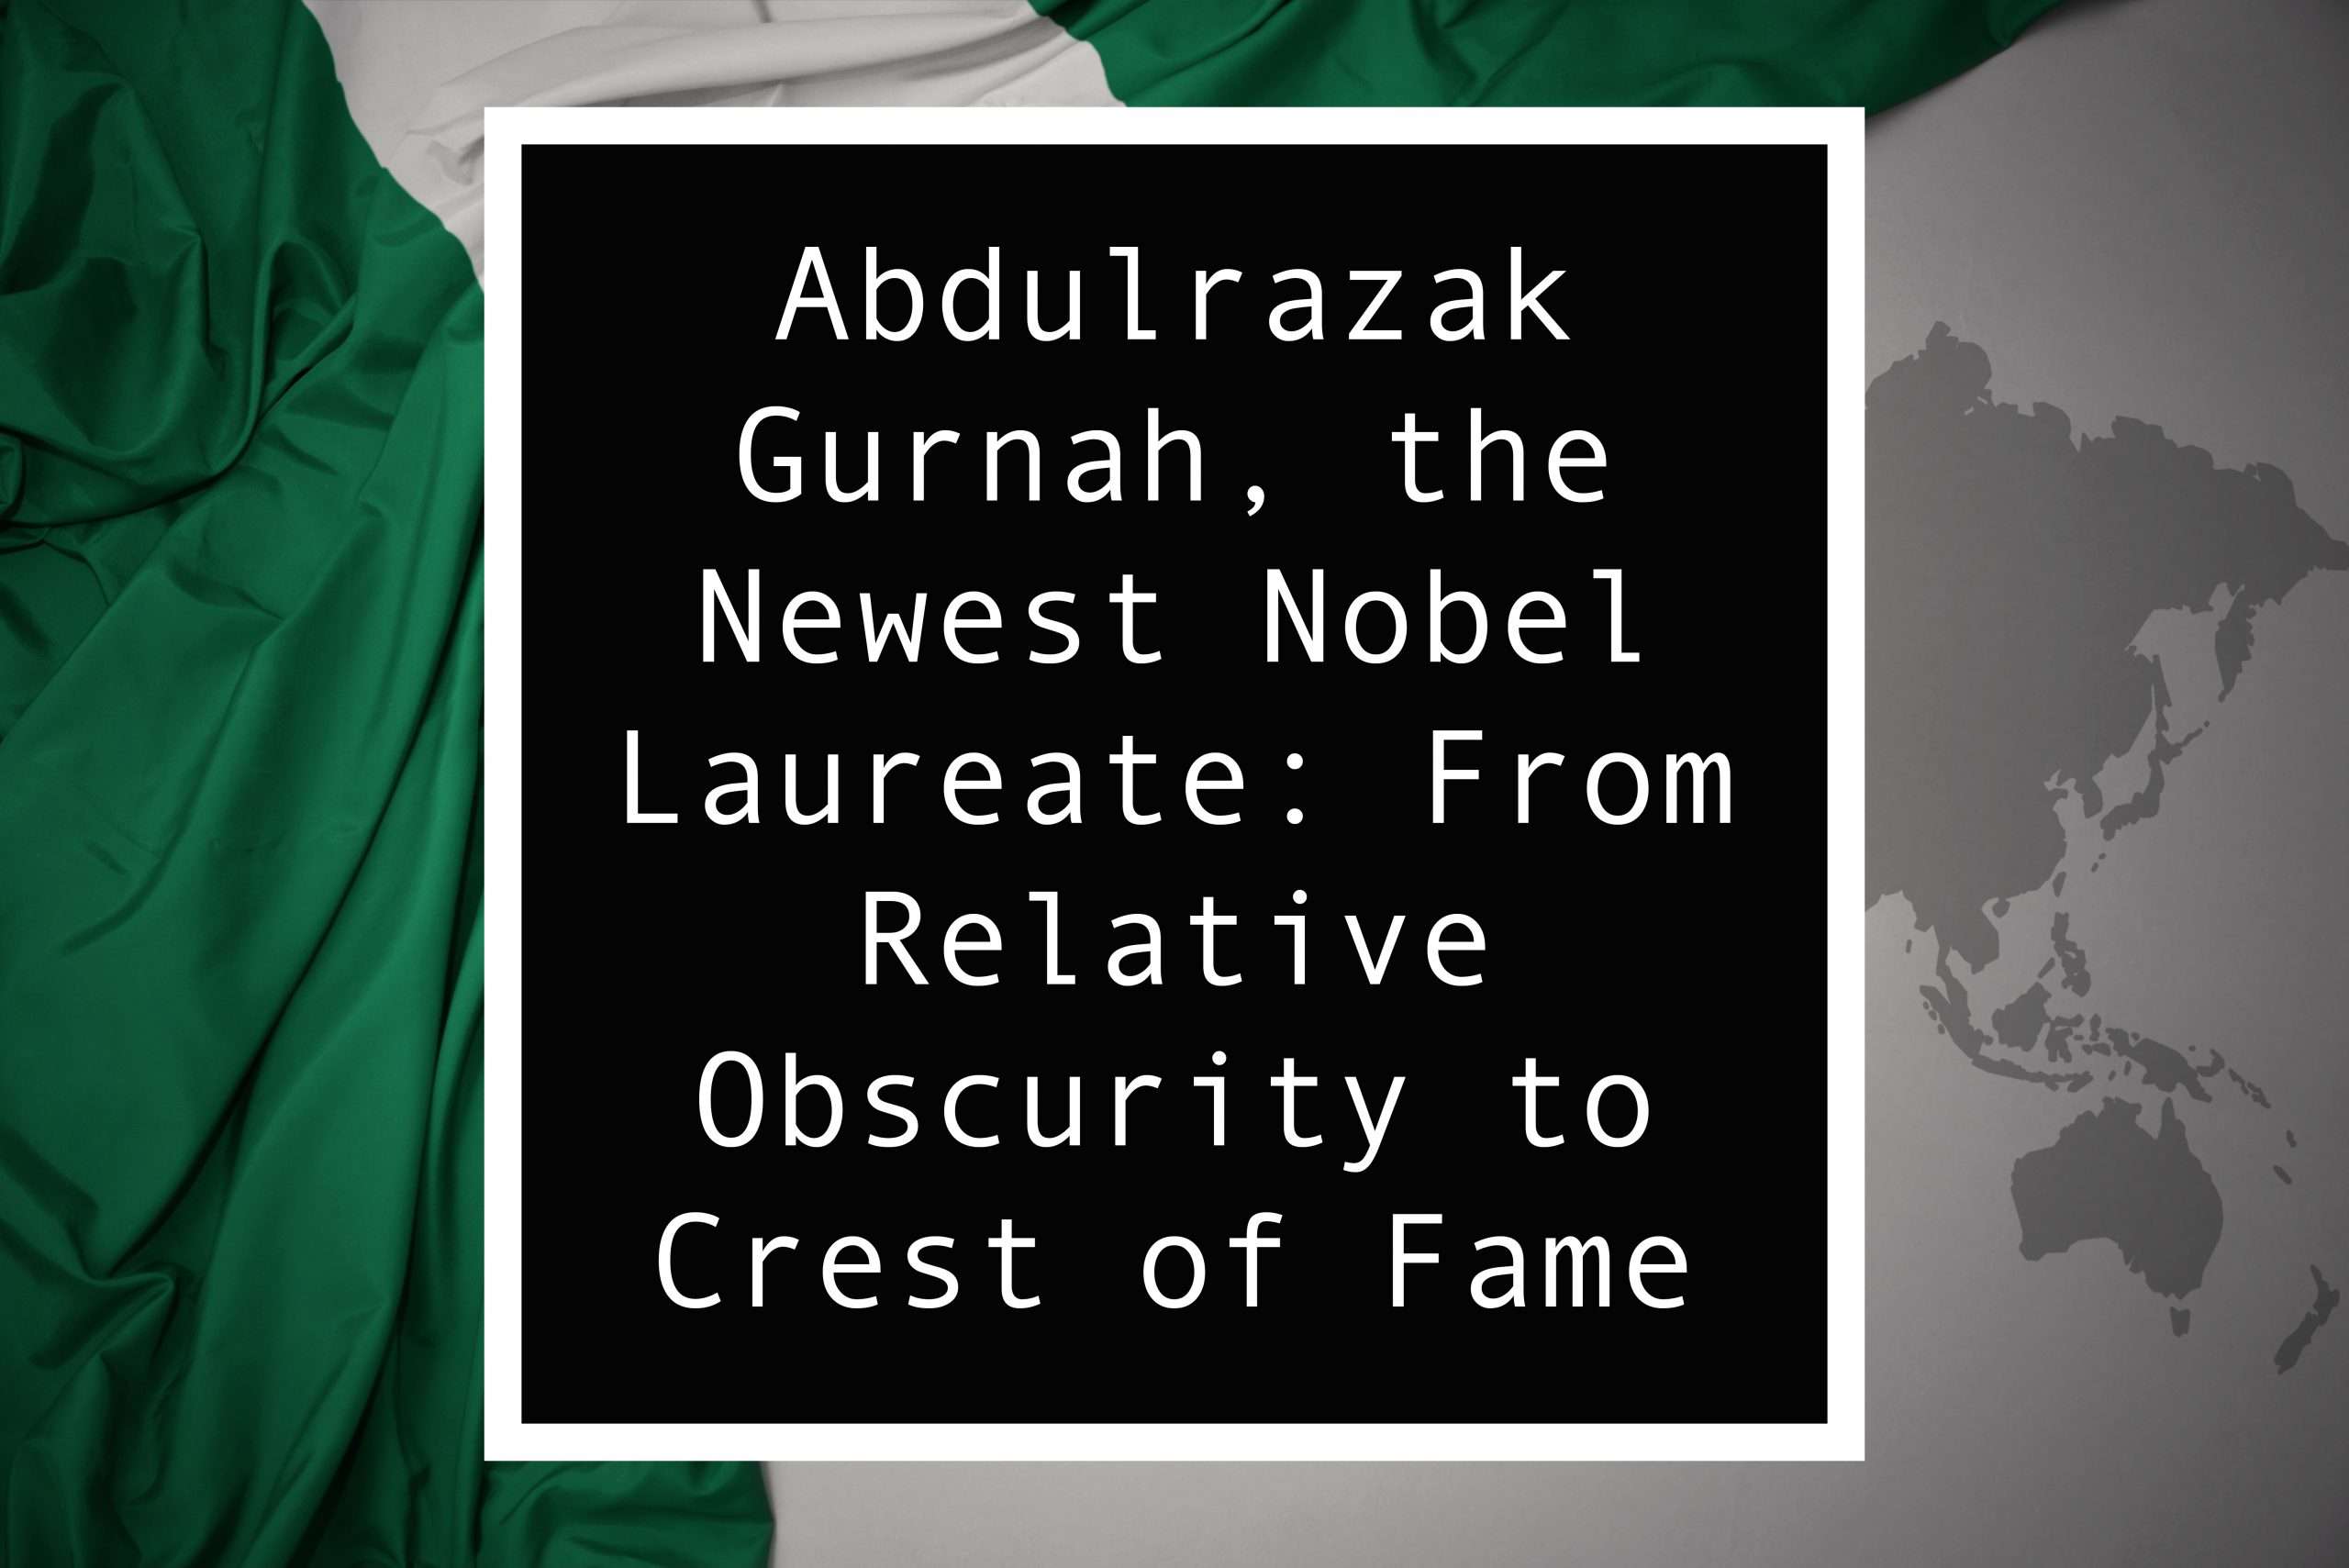 You are currently viewing Abdulrazak Gurnah: Relative Obscurity to Crest of Fame